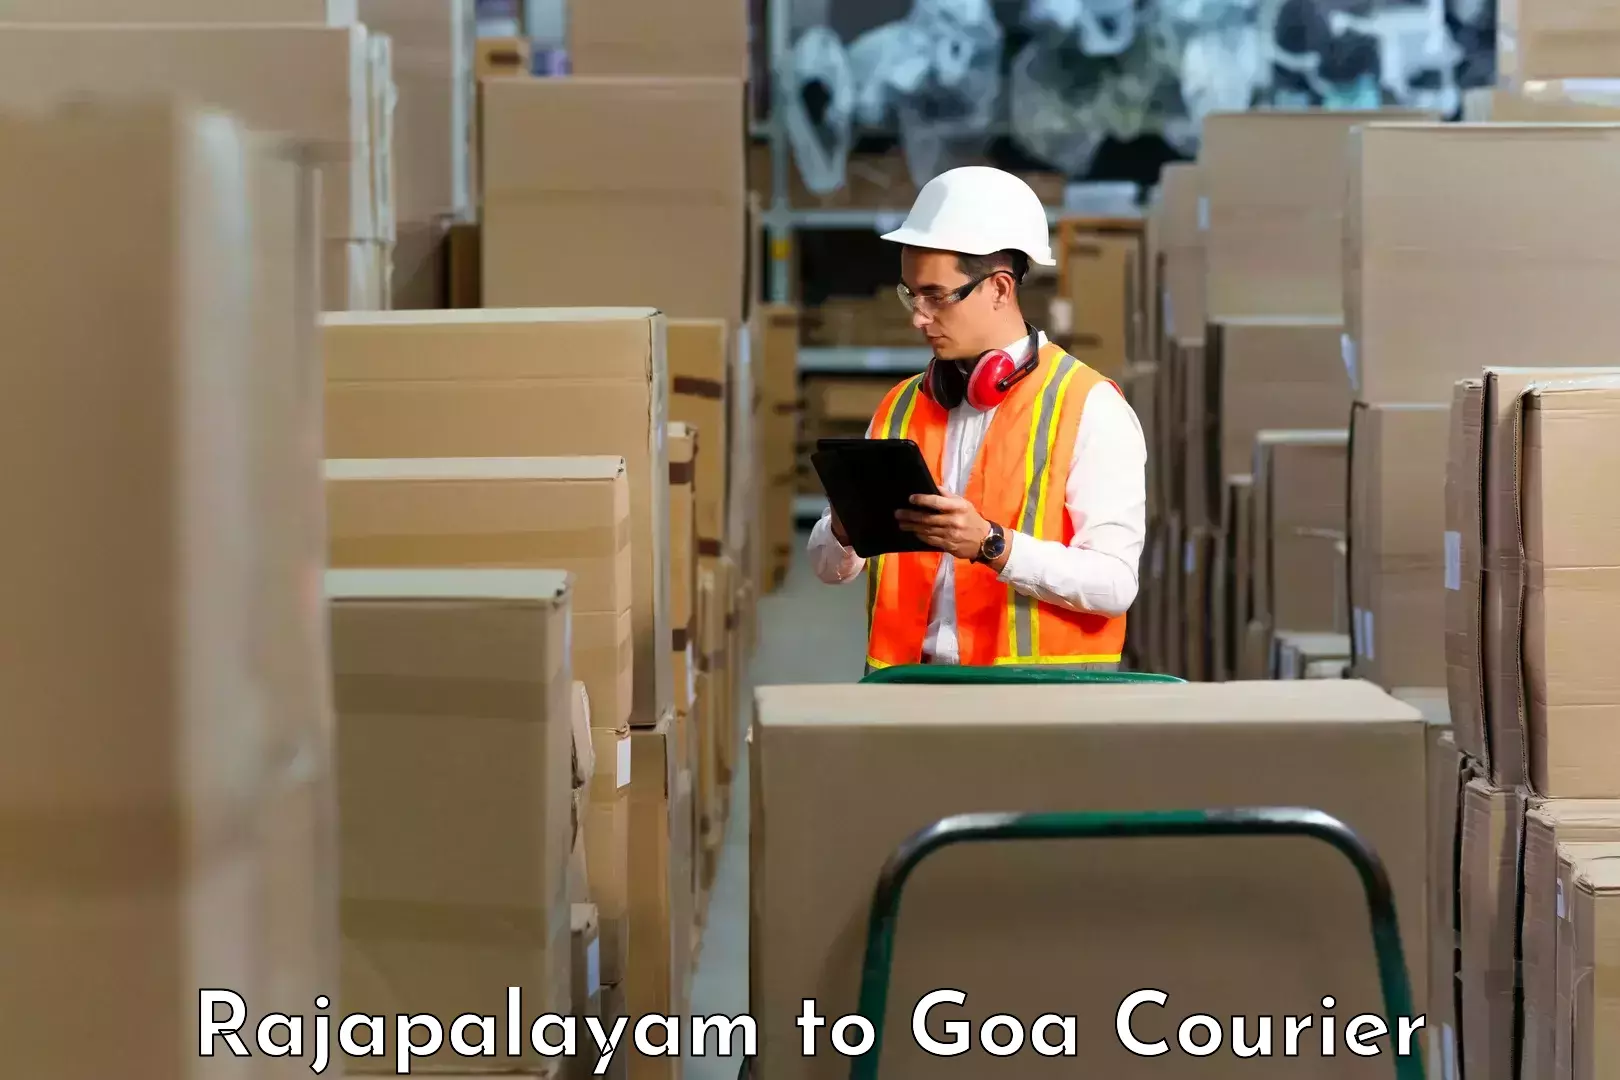 Reliable delivery network Rajapalayam to Goa